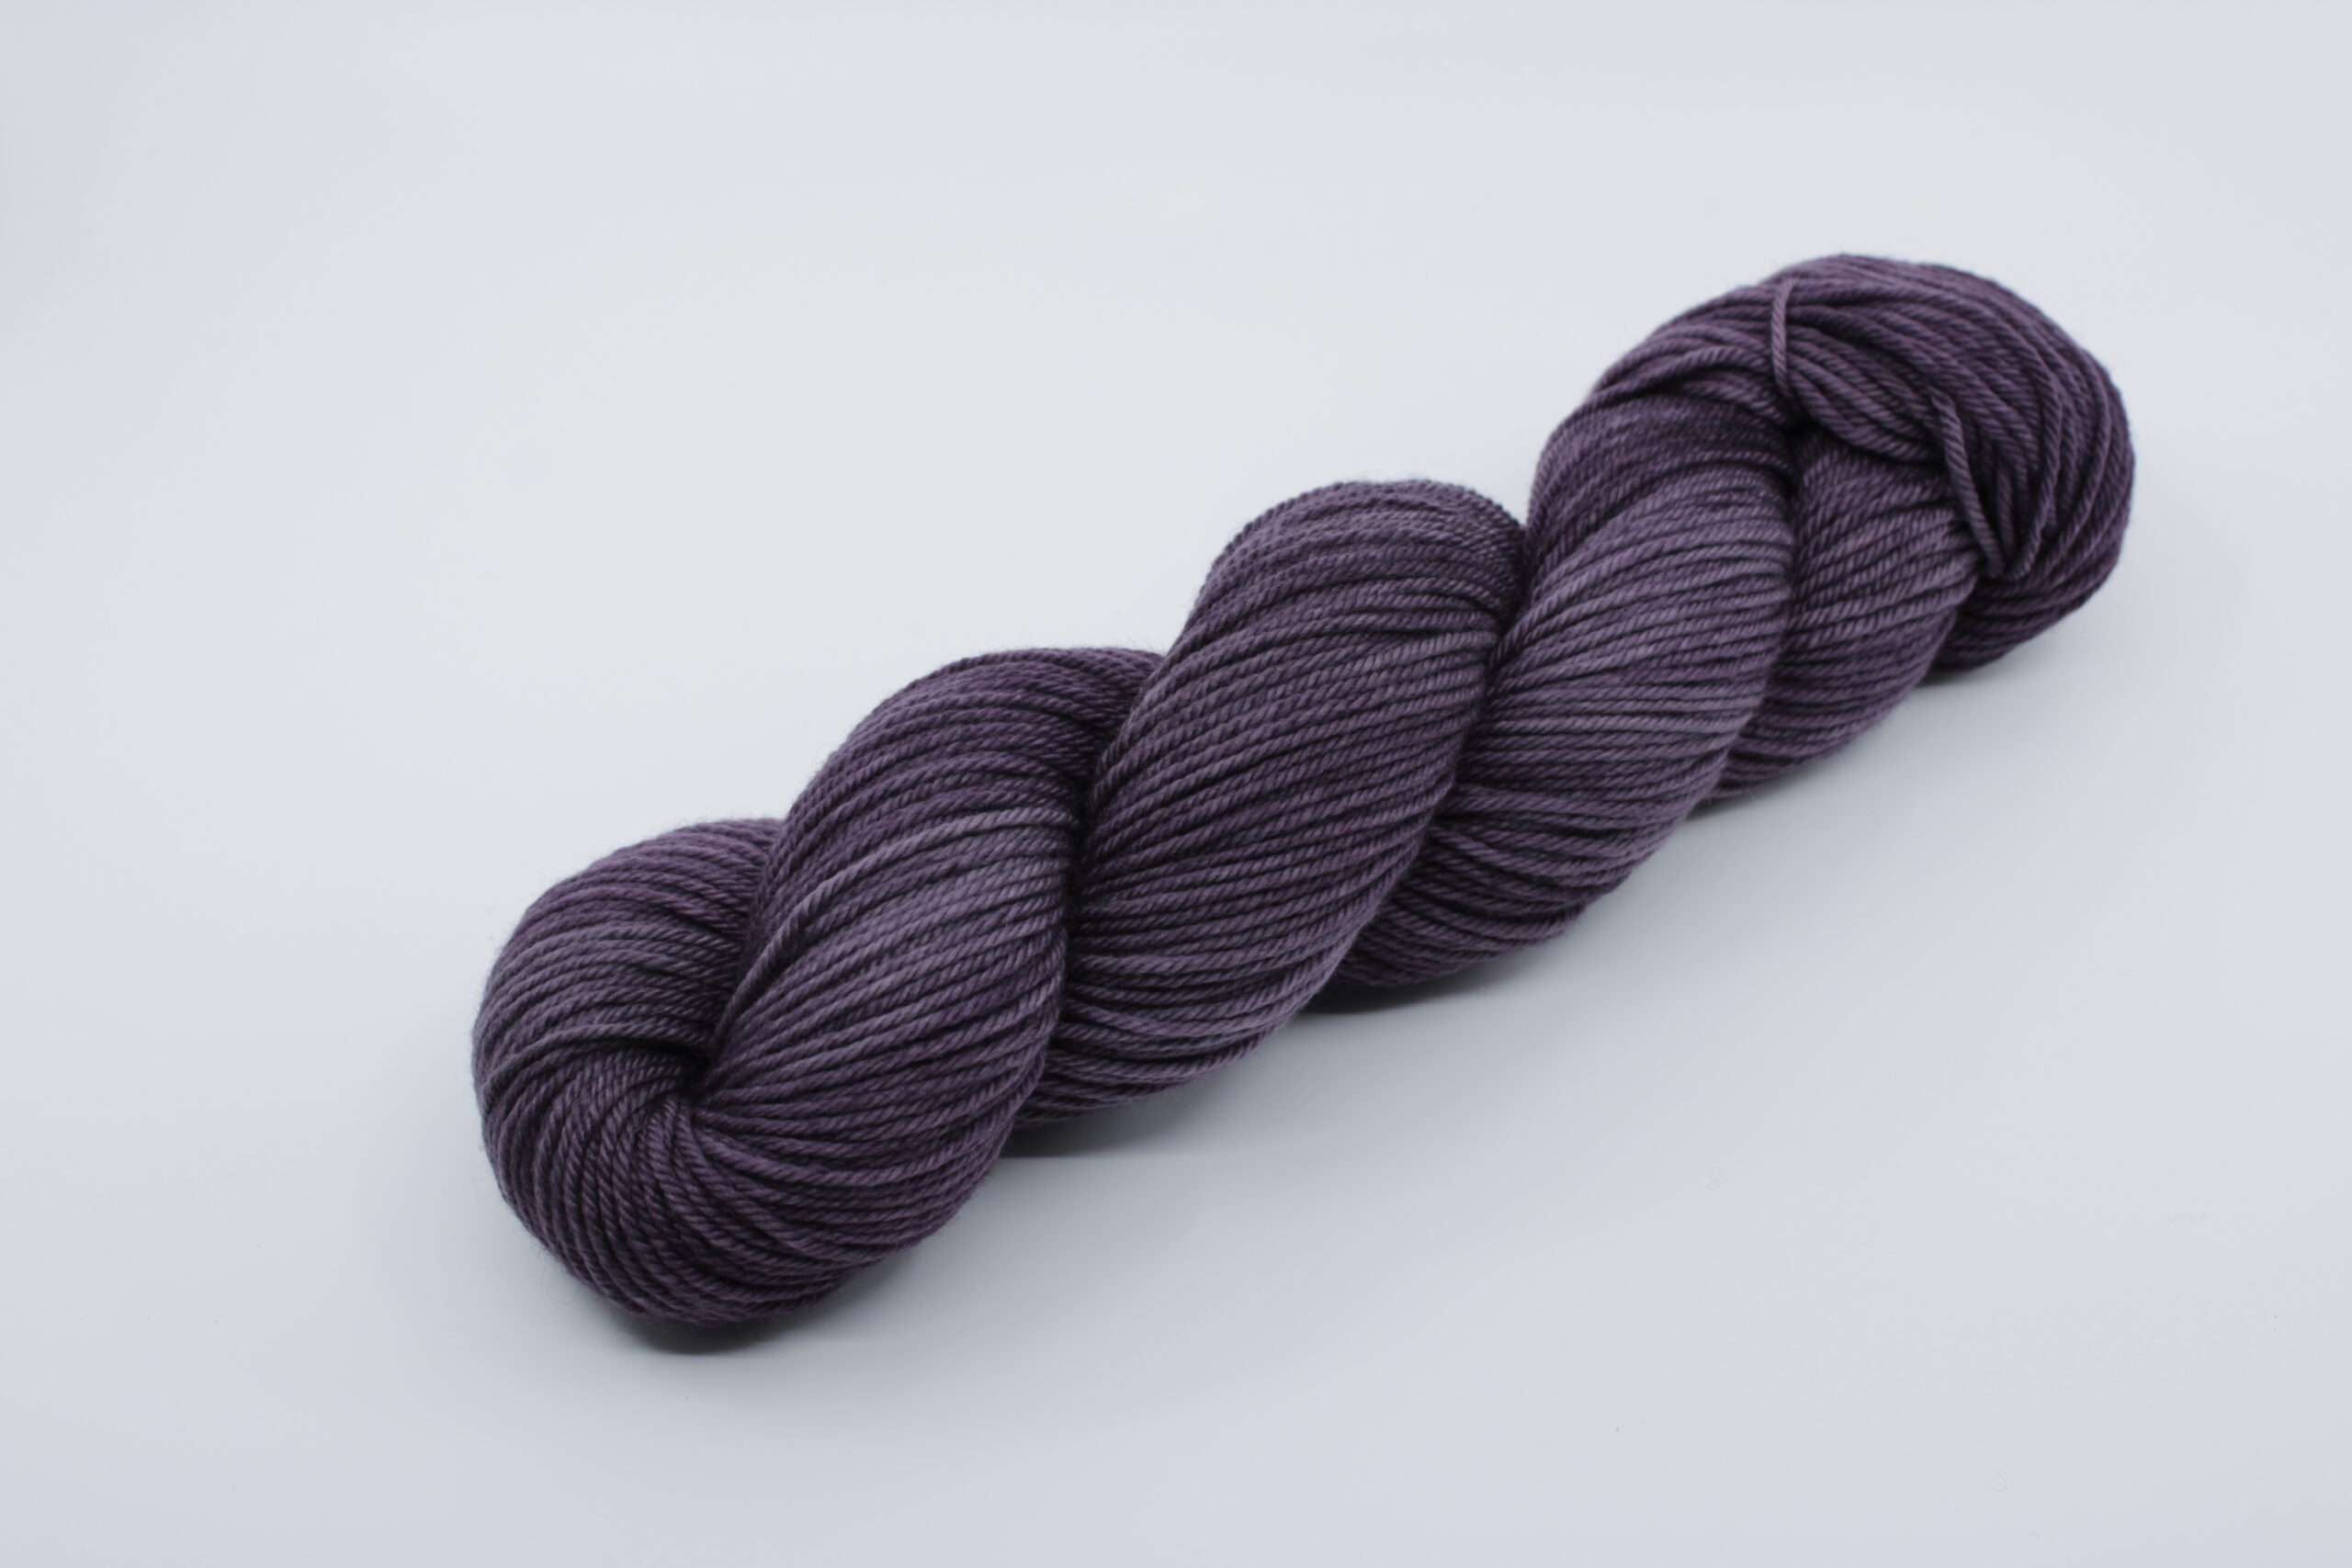 Folcon worsted base. Wool 100% untreated merino. Trio of colors: eggplant. Color: Violine.